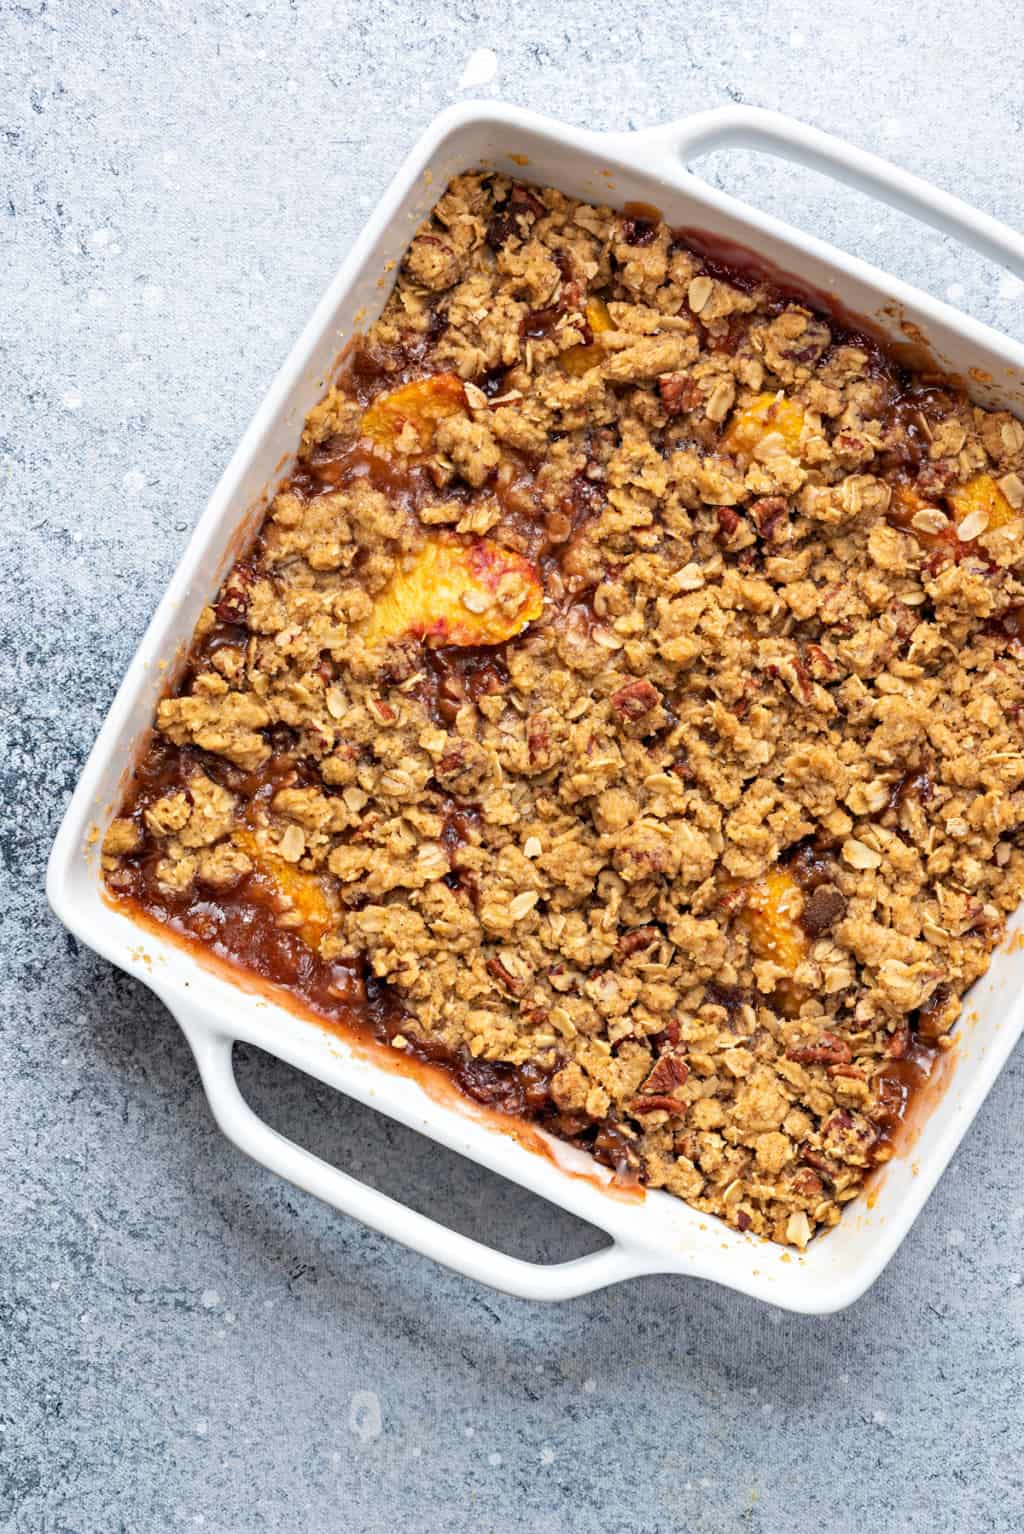 warm peach crisp with oat topping in a white baking dish on a grey table